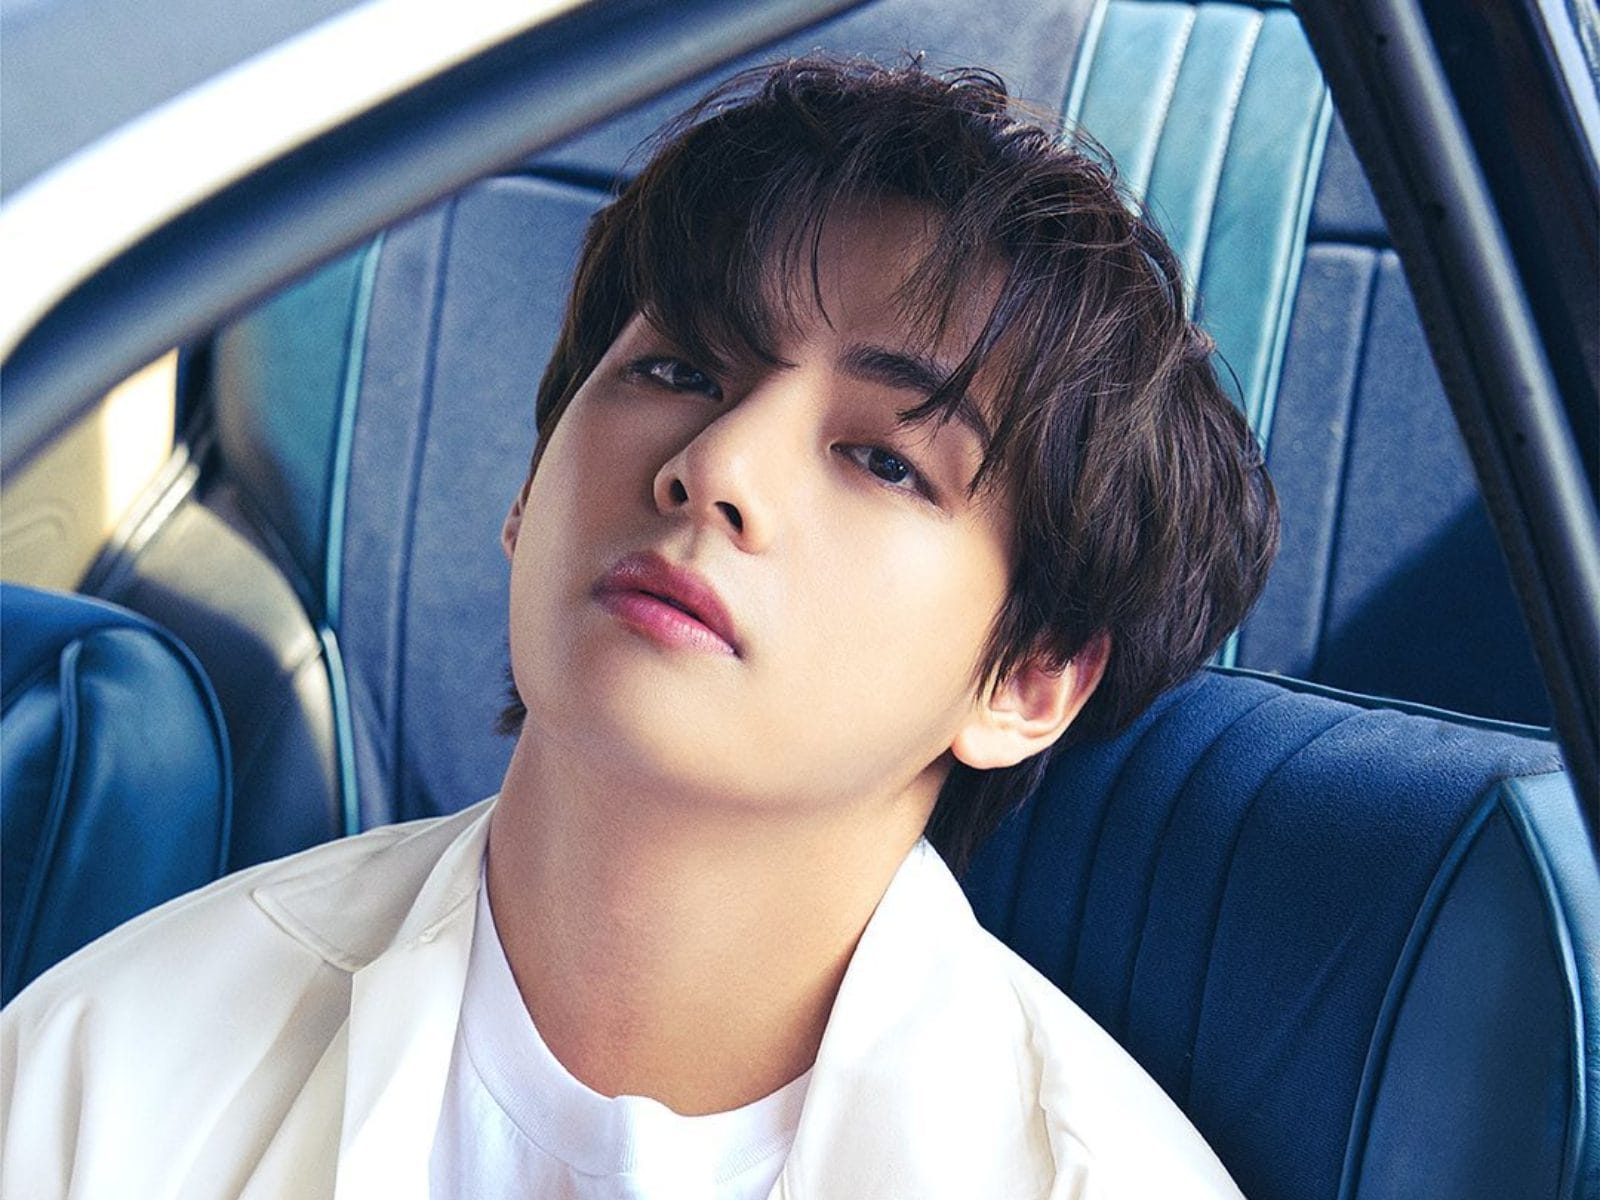 BTS's V (Kim Taehyung) turns heads at the airport with his